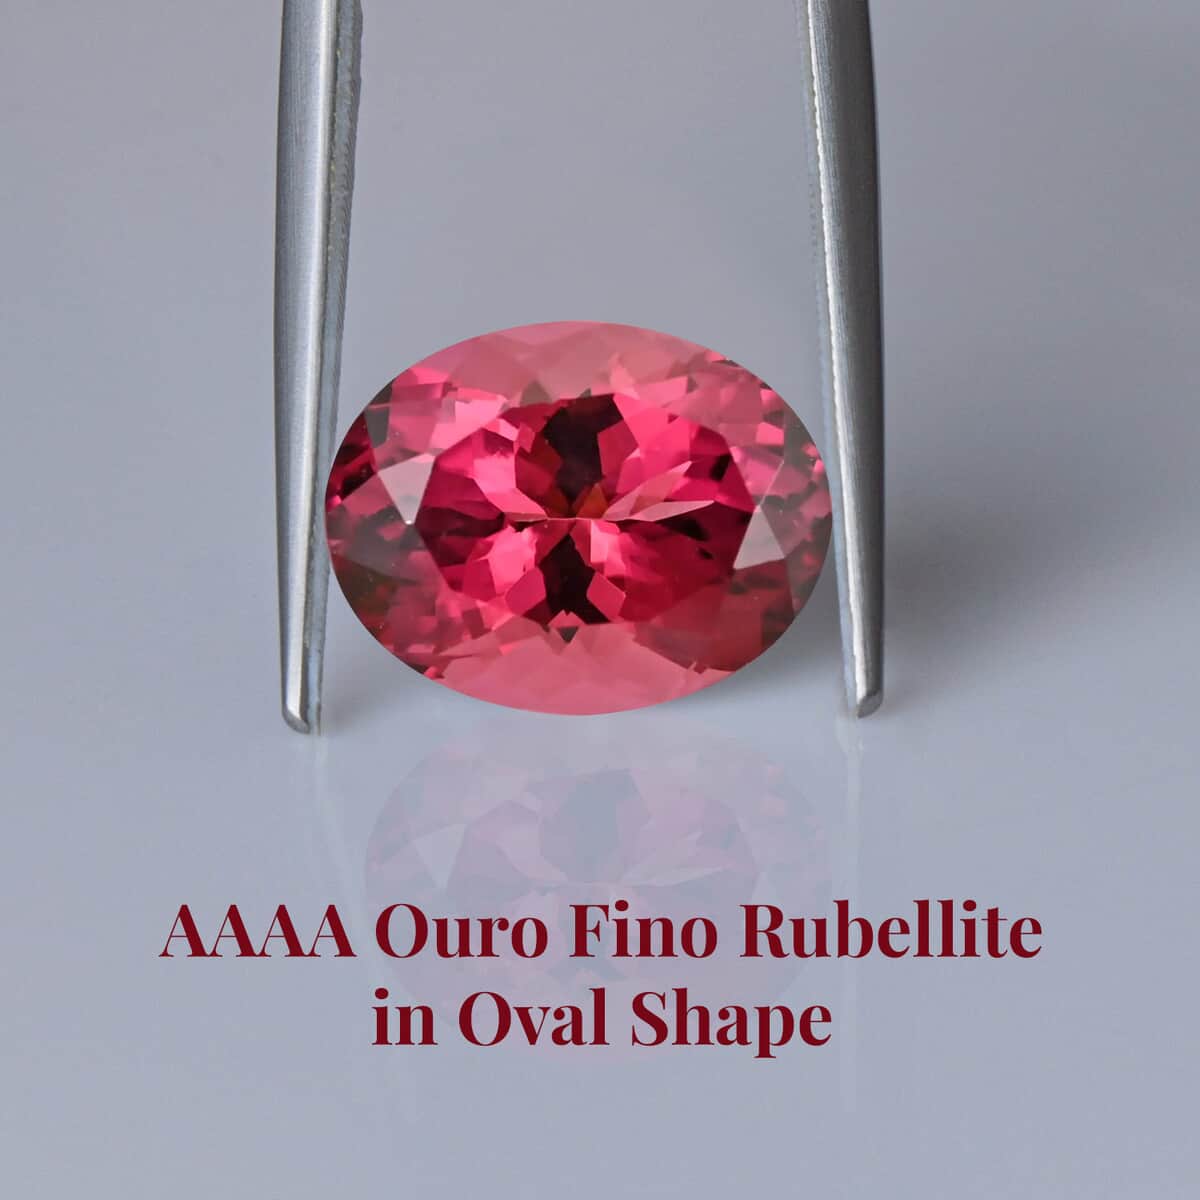 Certified & Appraised AAAA Ouro Fino Rubellite (Ovl Free Size) 2.00 ctw, Loose Gemstones for Jewelry, Rubellite Gemstone For Jewelry Making, Oval Cut Gemstone image number 1